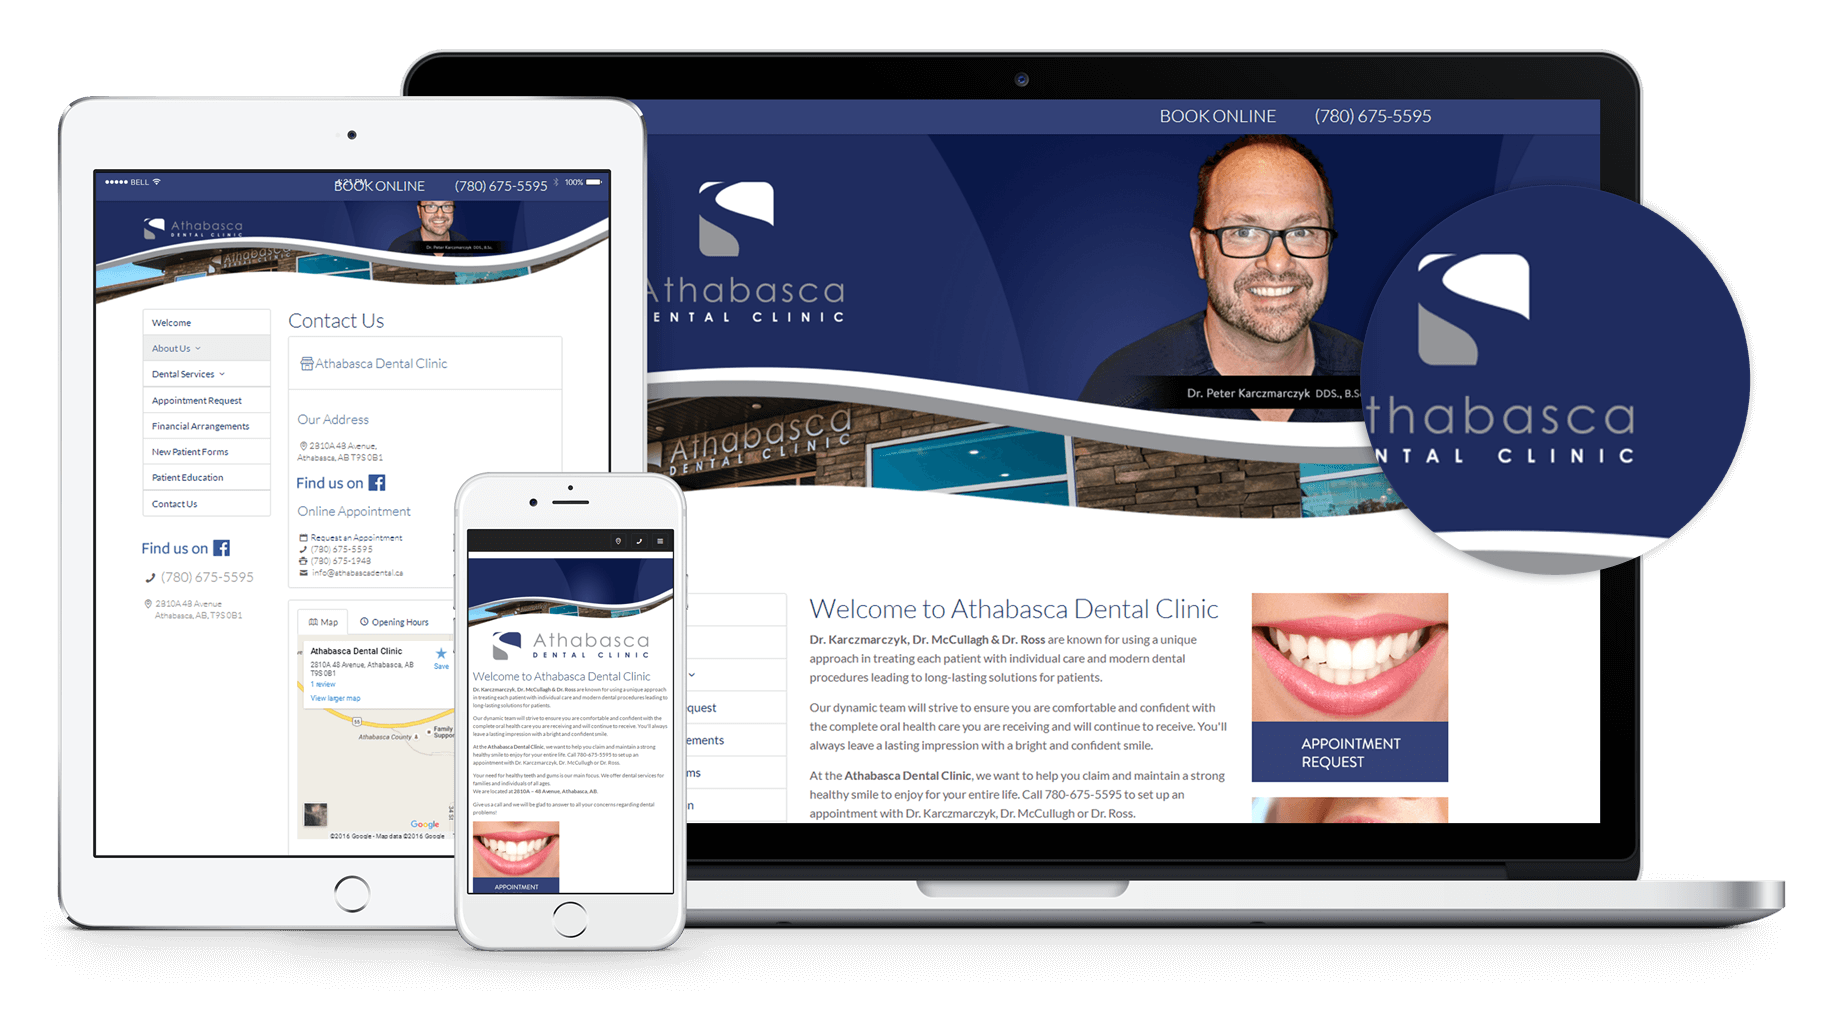 New Website for Athabasca Dental Clinic